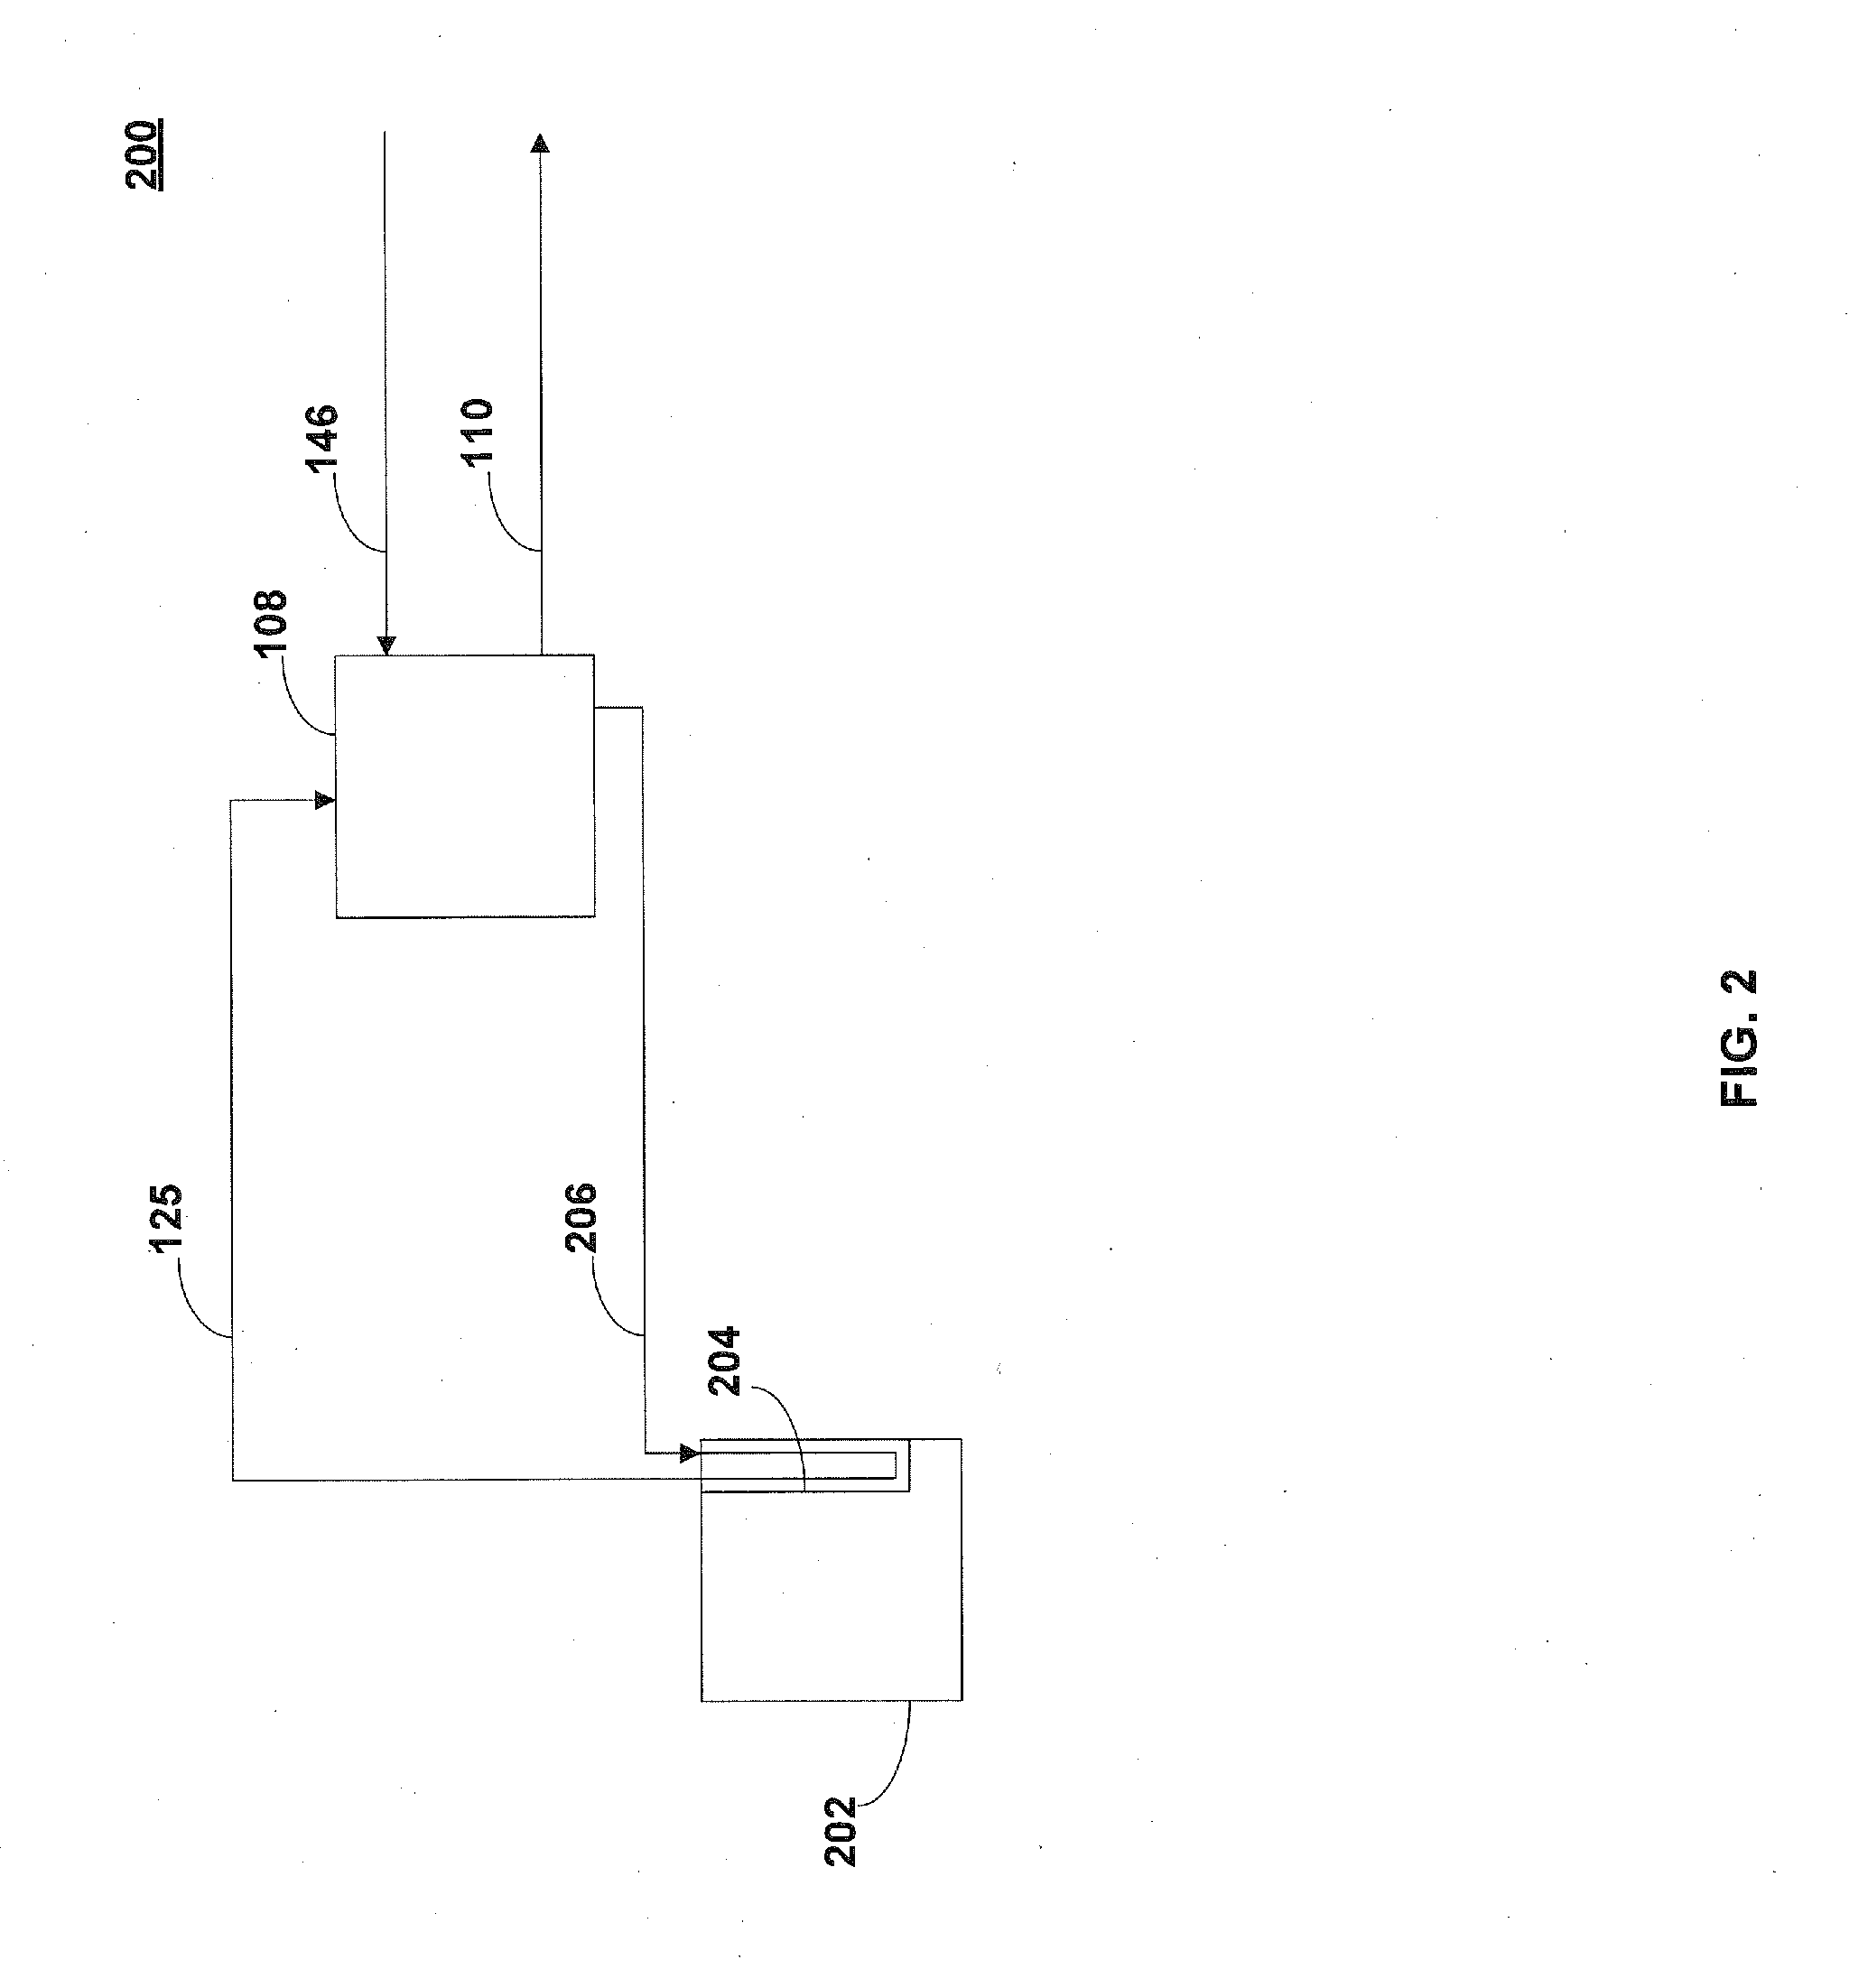 Independent production of electrolyzed acidic water and electrolyzed basic water